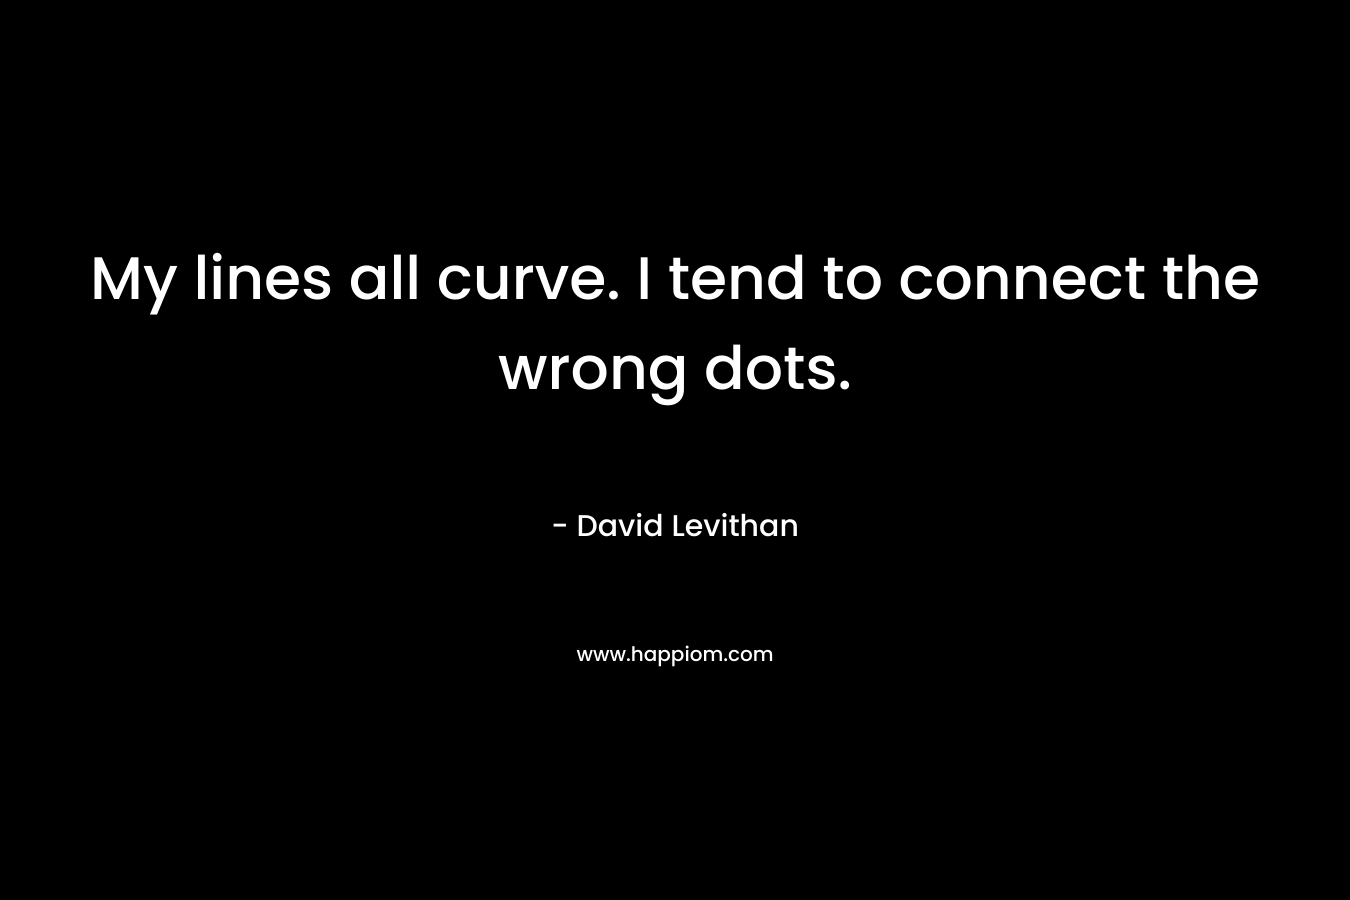 My lines all curve. I tend to connect the wrong dots. – David Levithan